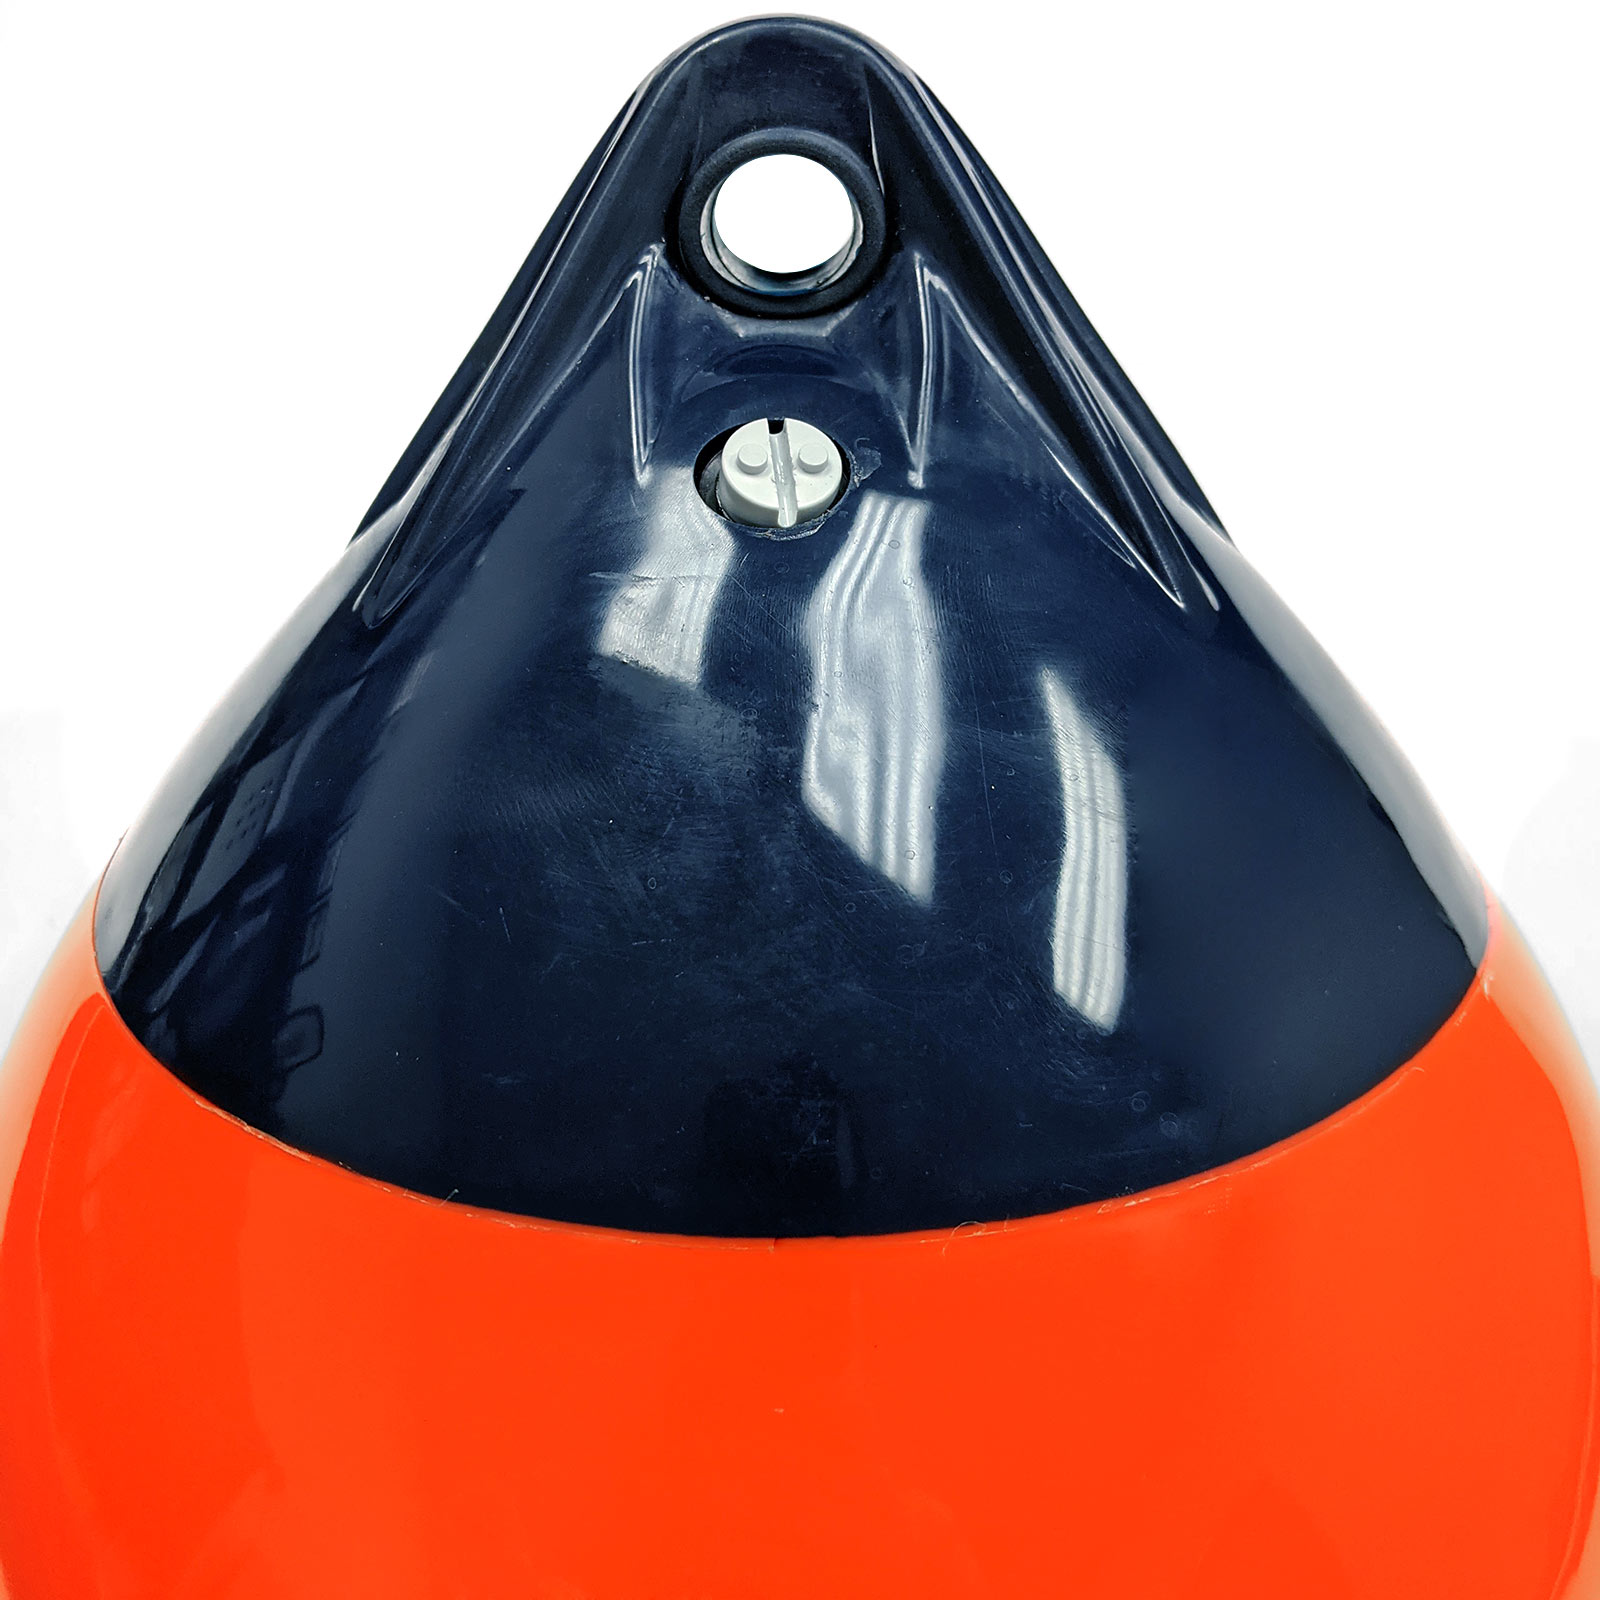 North East Harbor Heavy-Duty Training Punching Boxing Speed Water Bag - For Commercial and Home Gyms - 11.5" Diameter x 15" Height -Ultra Durable